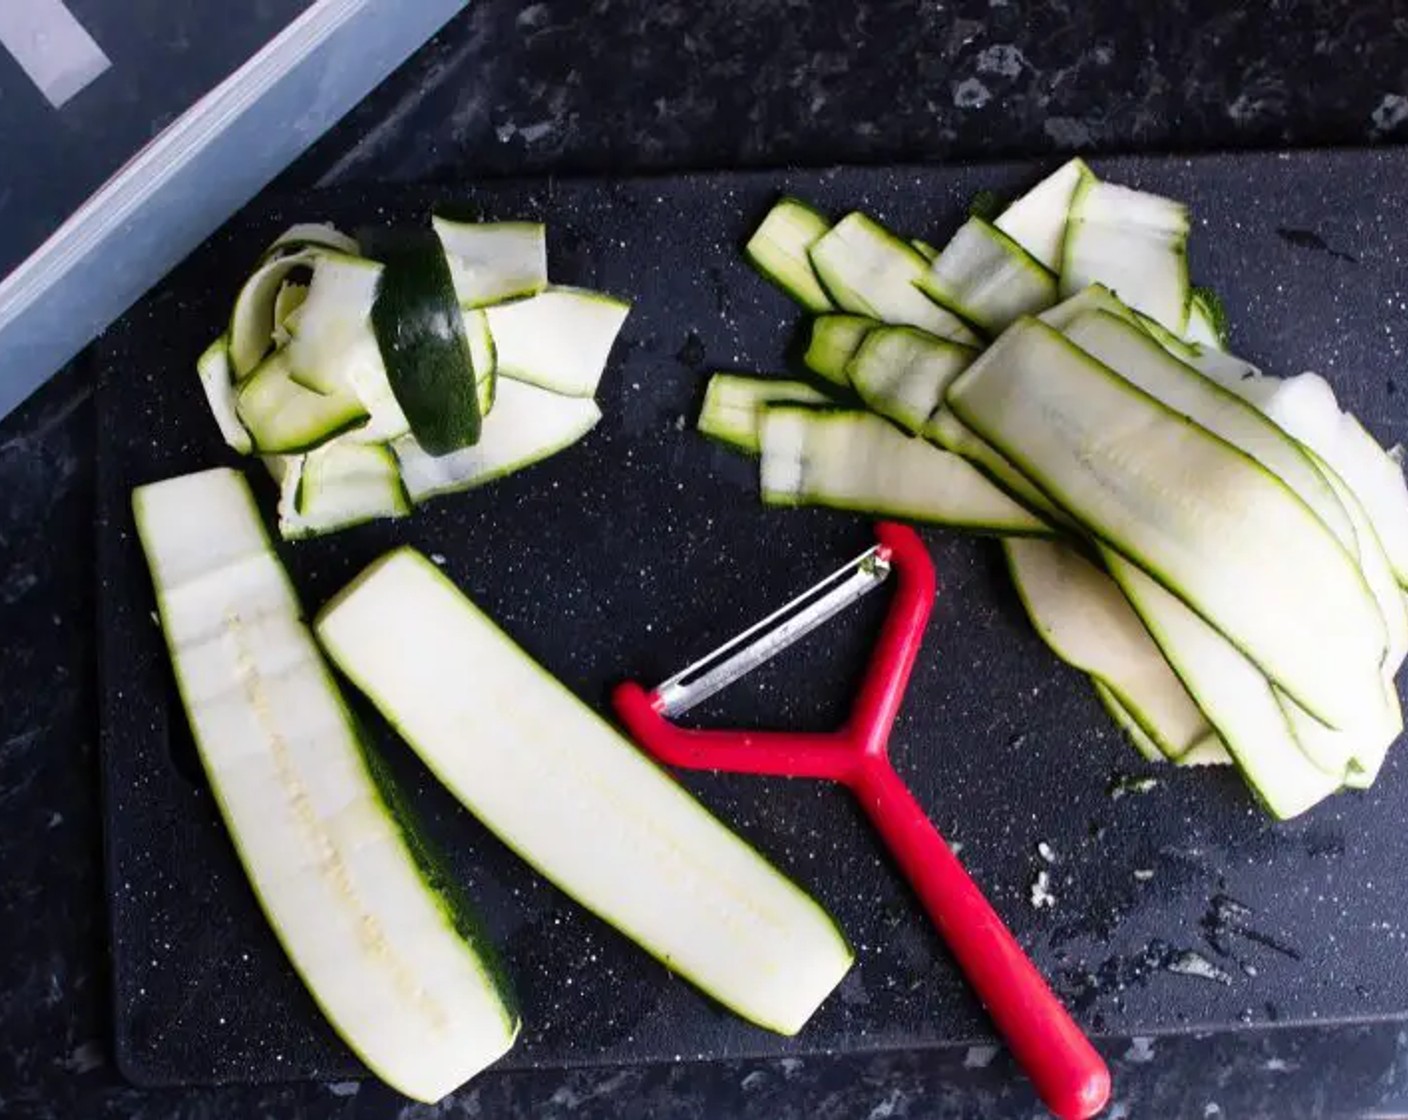 step 1 Using either a peeler or cheese slicer, peel along the Zucchini (2) lengthways to get long, thick “ribbons”.